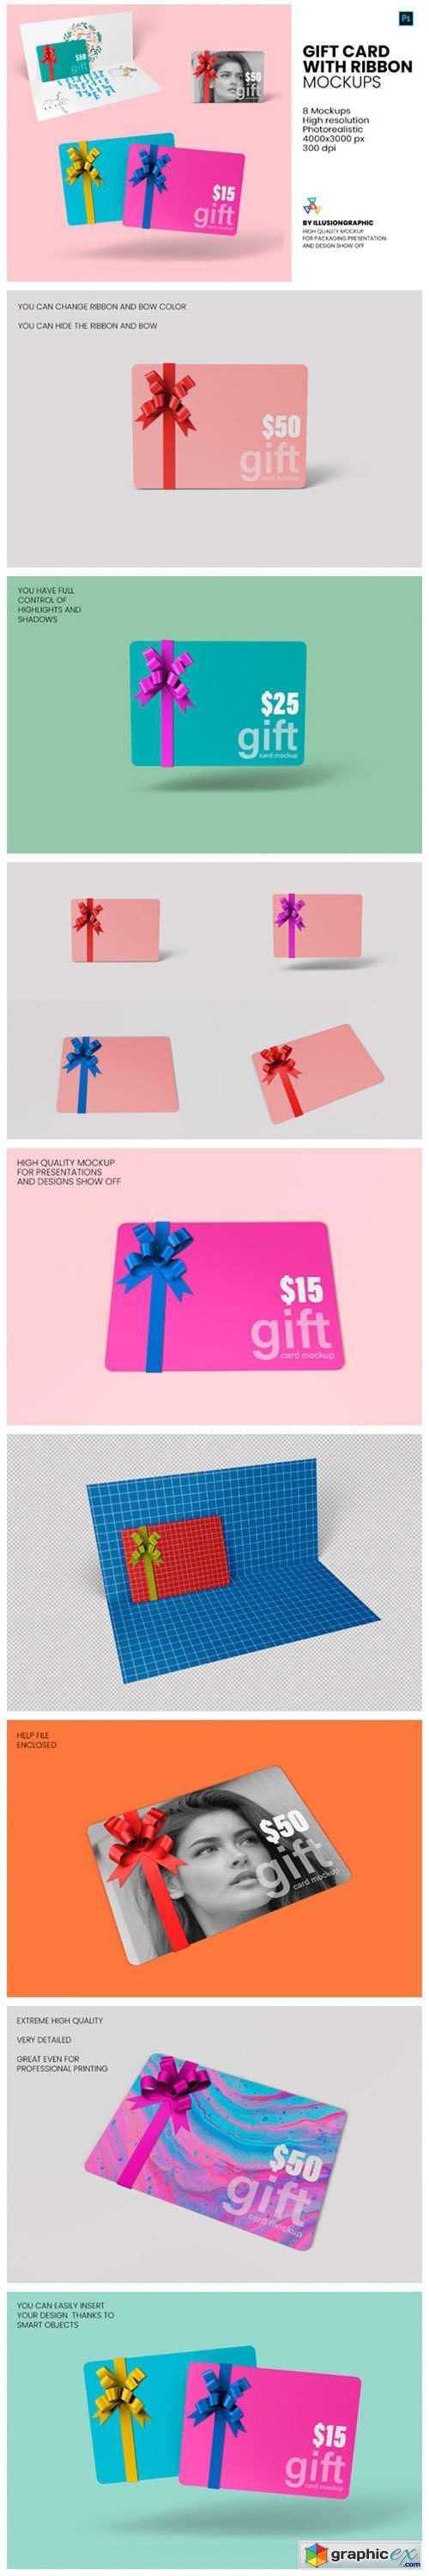 Download Gift Card with Ribbon Mockup - 8 Views » Free Download Vector Stock Image Photoshop Icon